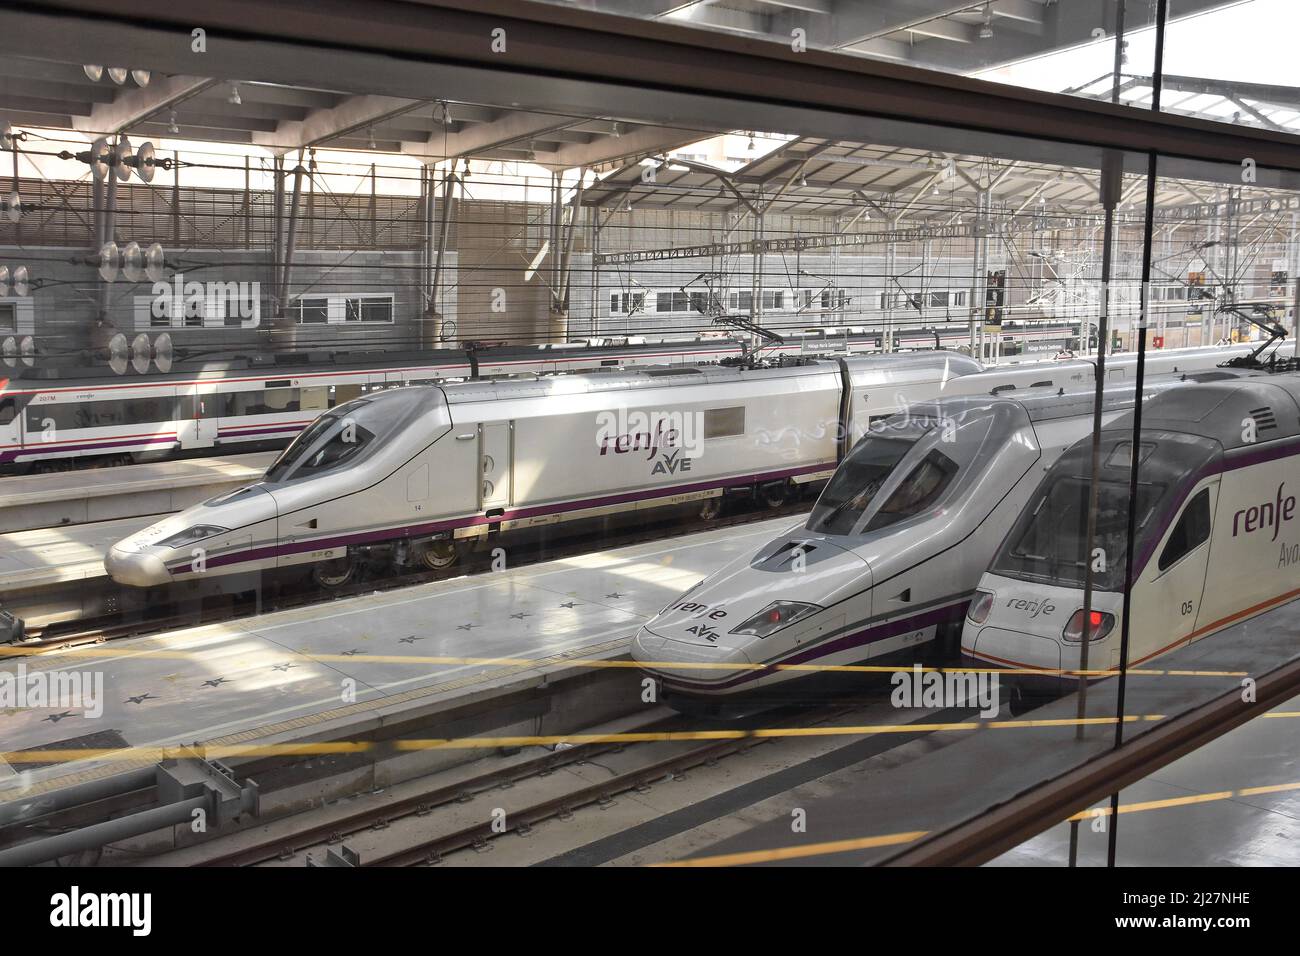 AVE High-speed trains operated by Renfe at Maria Zambrano railway station in Malaga Spain. Stock Photo